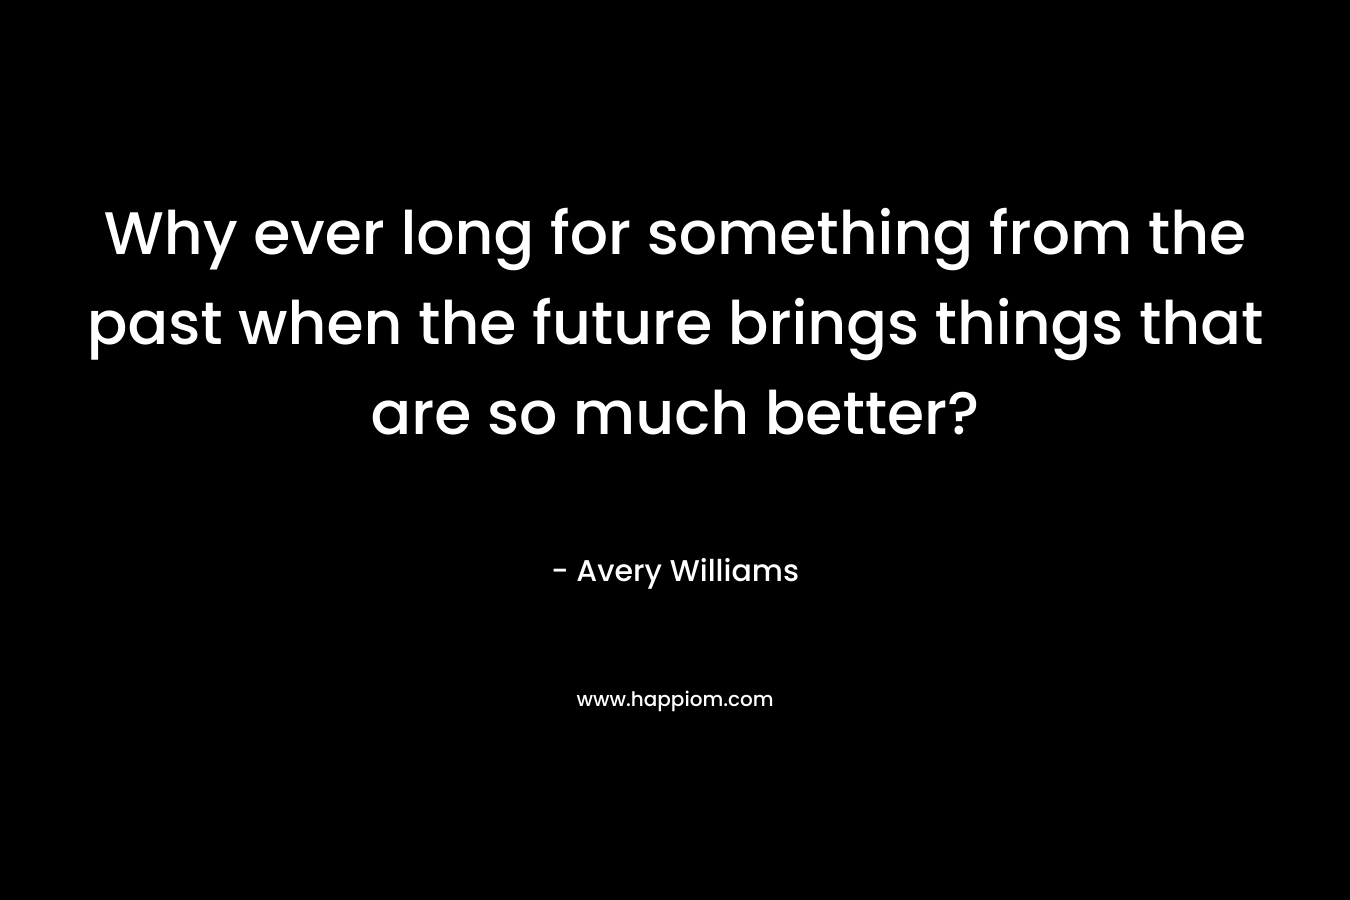 Why ever long for something from the past when the future brings things that are so much better?